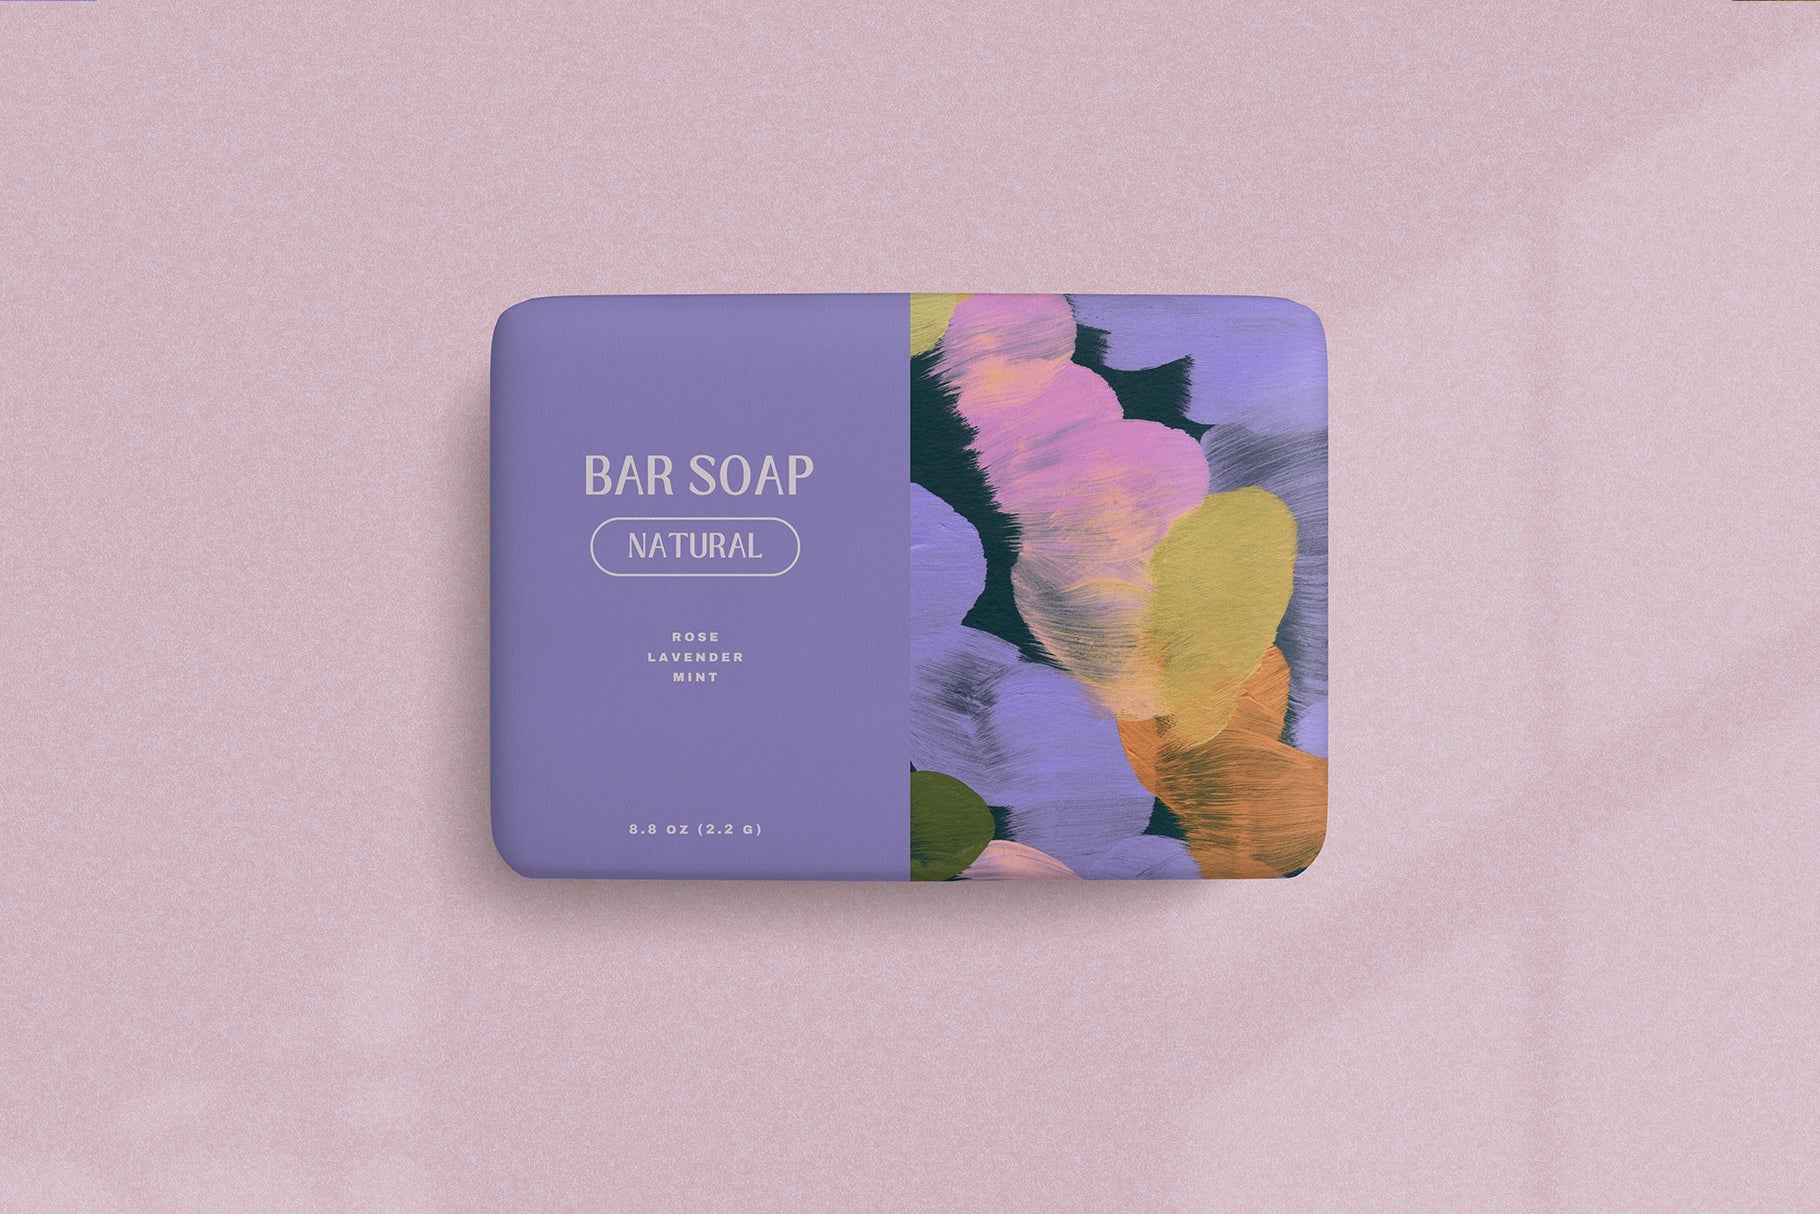 painted artistic background on top of soap bar packaging